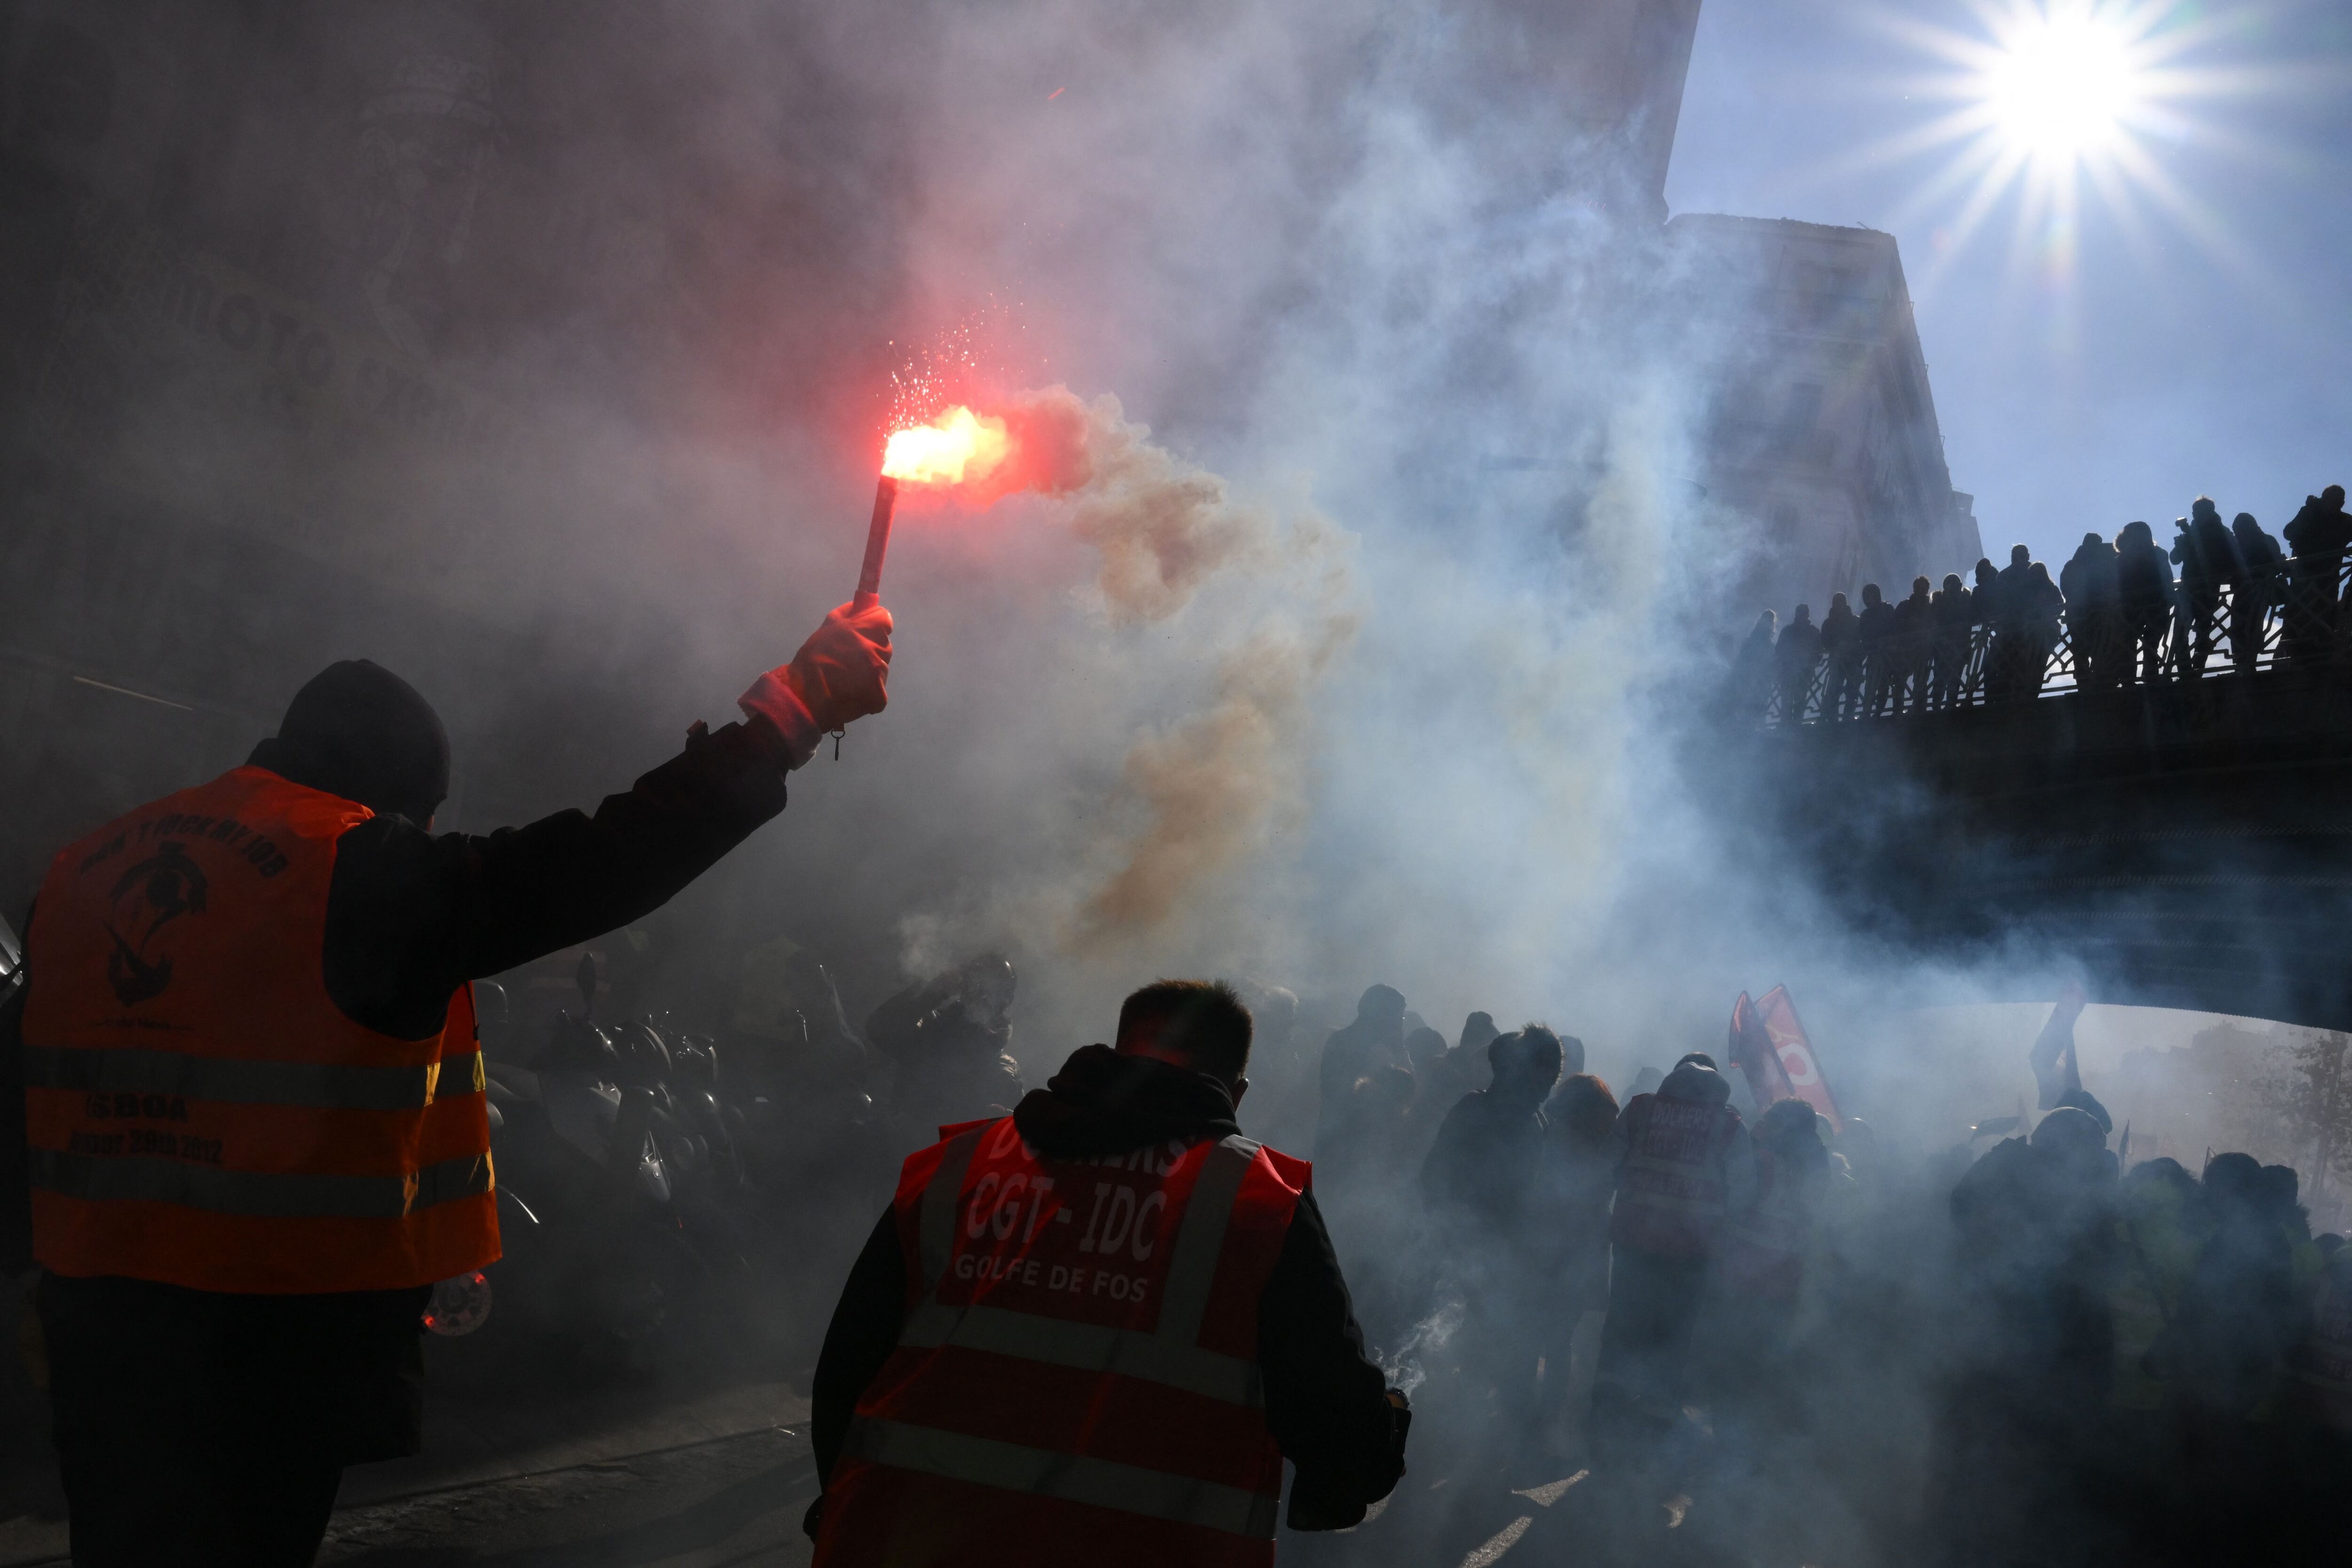 A protester waves a sparkler during a demonstration called by French unions against the government's pension reform plan in Marseille, southern France, on January 19, 2023. - On January 19, 2023, a protest began in France. day of strikes and protests.  disrupt transportation and education across the country in a lawsuit for the government, as workers oppose a deeply unpopular pension reform.  (Photo by NICOLÁS TUCAT / AFP)